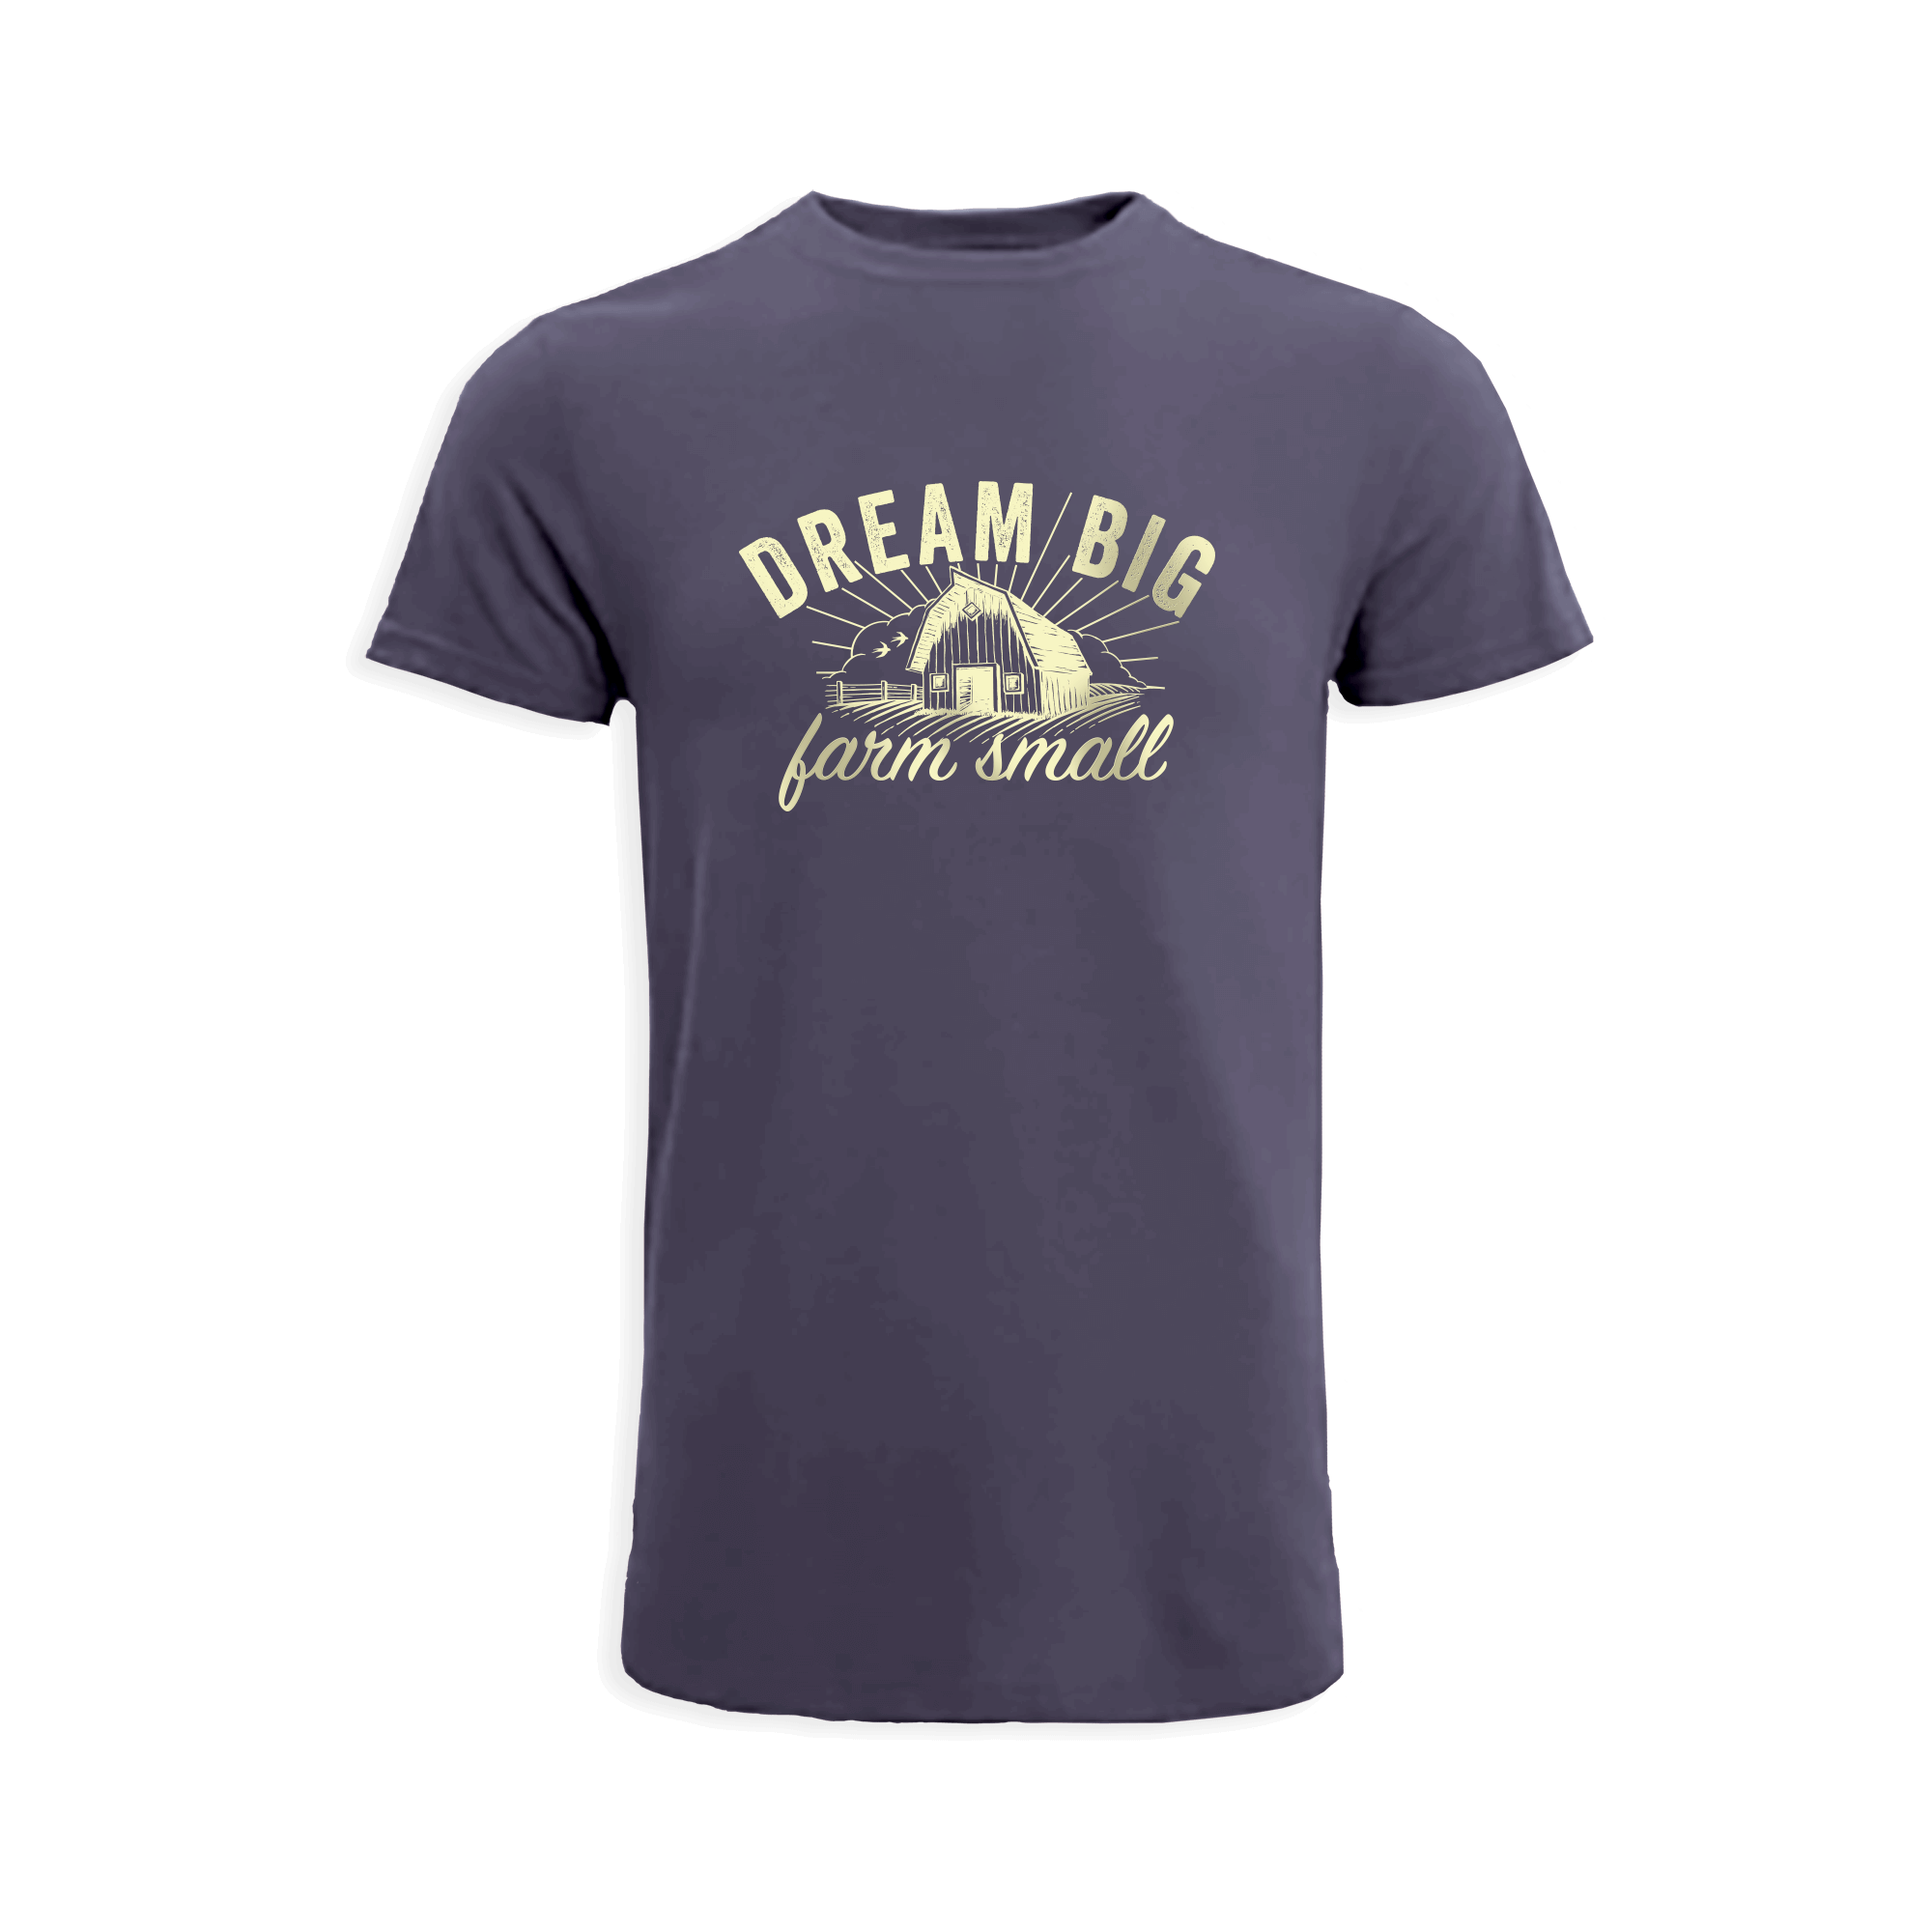 Visit the Dream Big Farm Small Tee Product Page